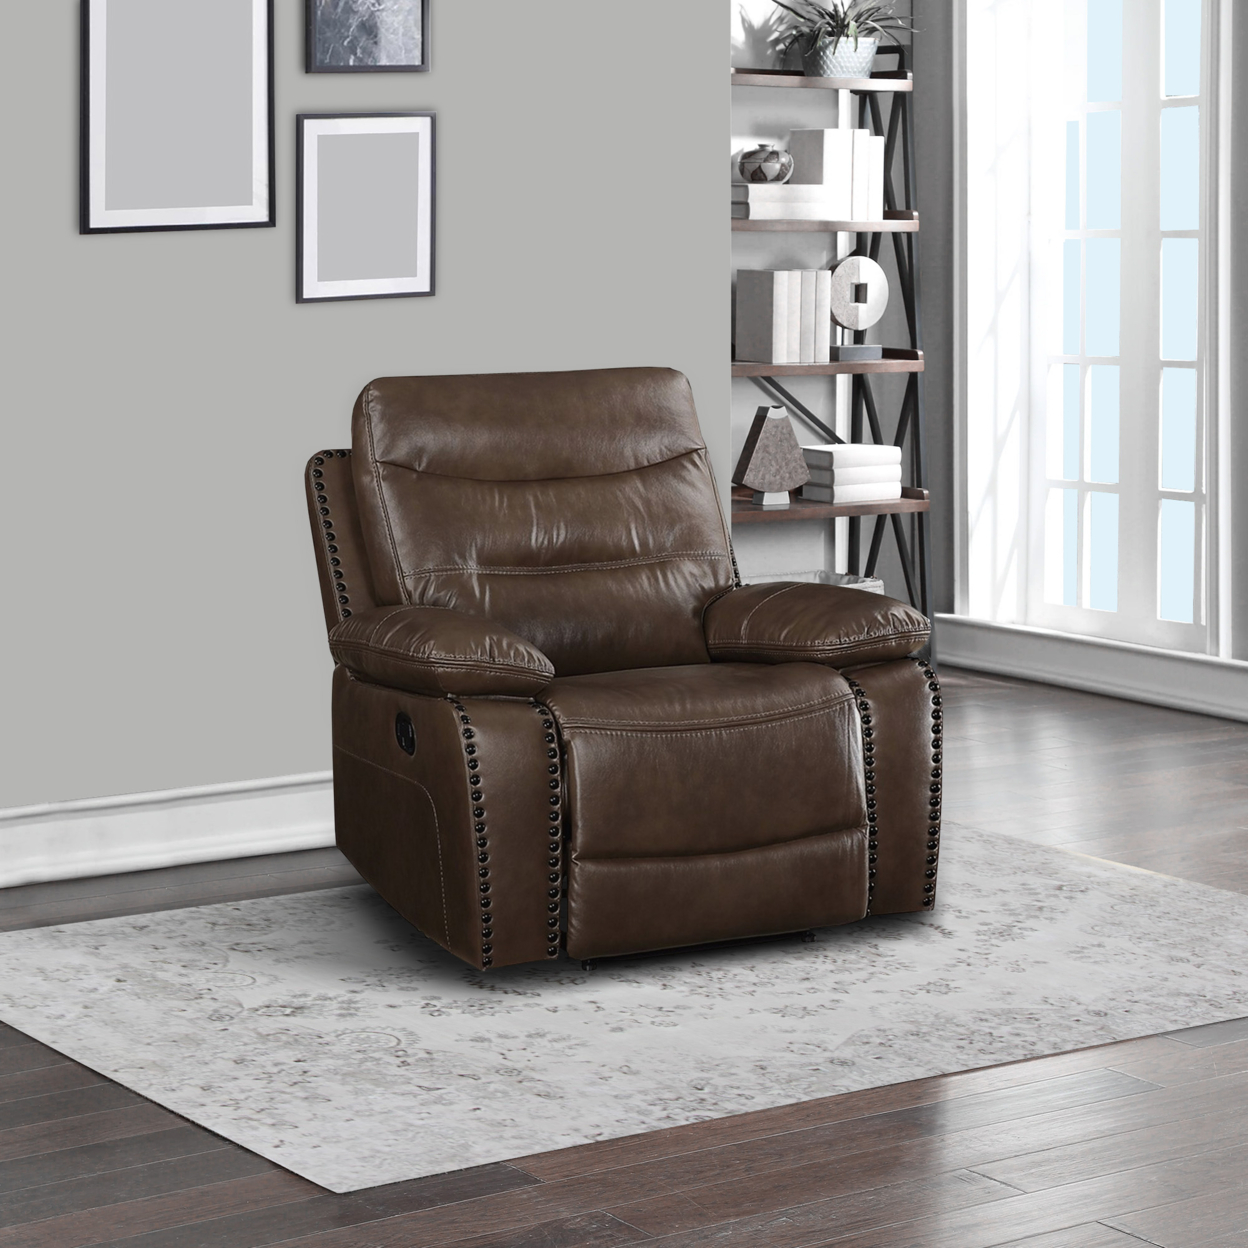 Leatherette Power Recliner With Nailhead Trim Accent, Brown- Saltoro Sherpi